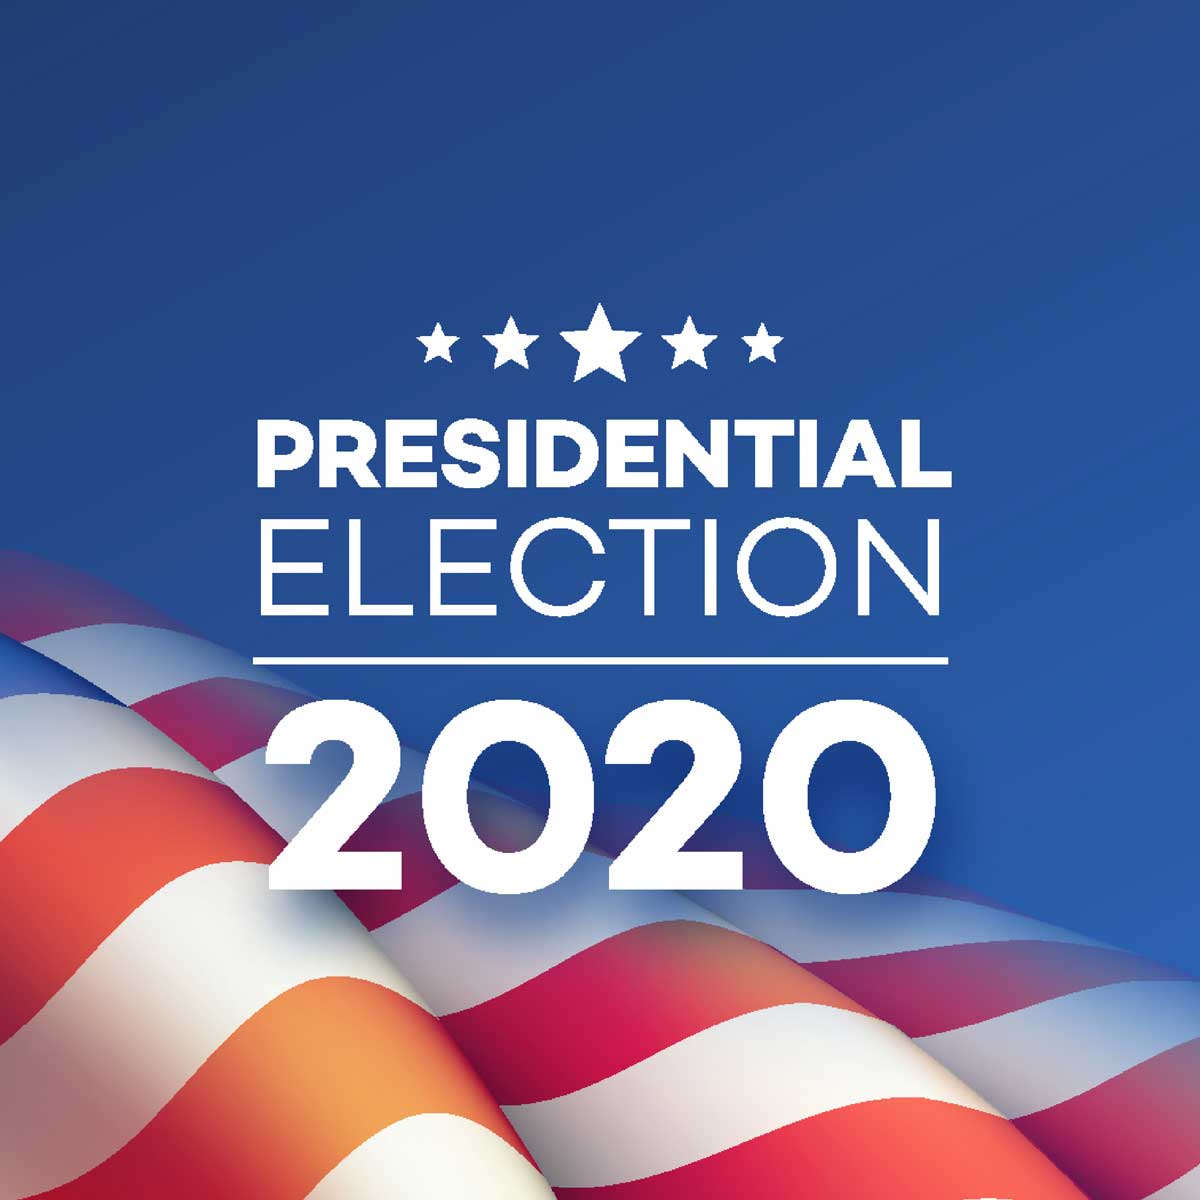 American Presidential Election 2020 background design